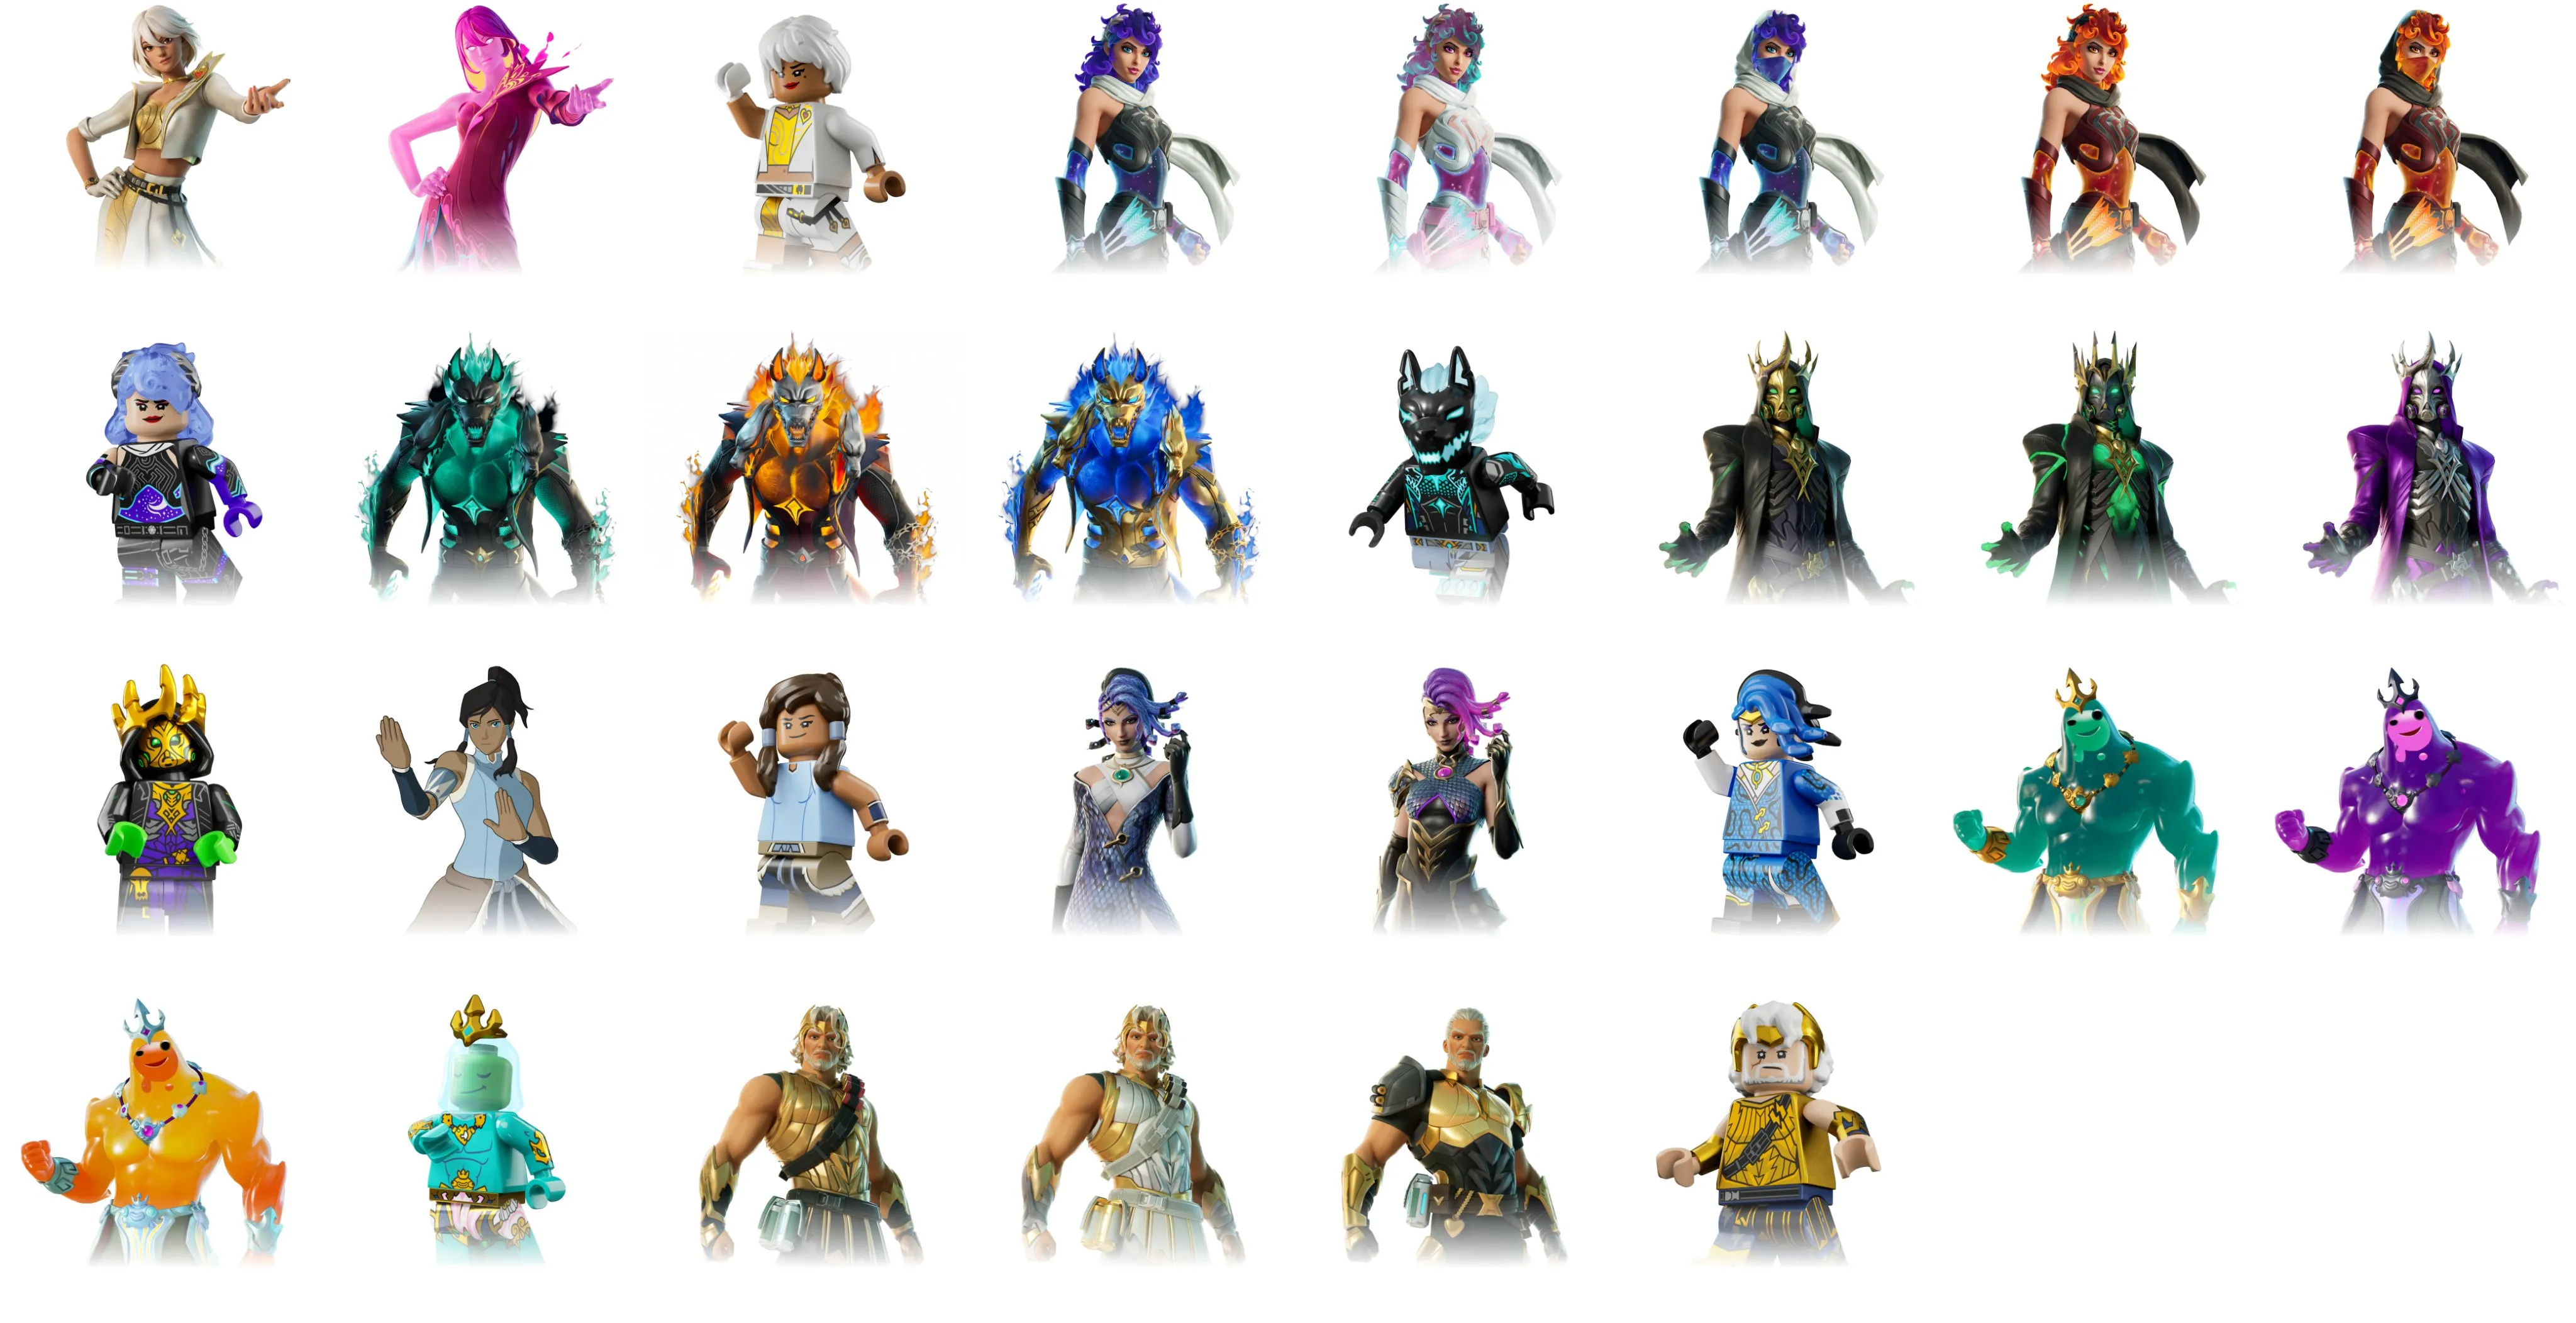 All Battle Pass Outfits